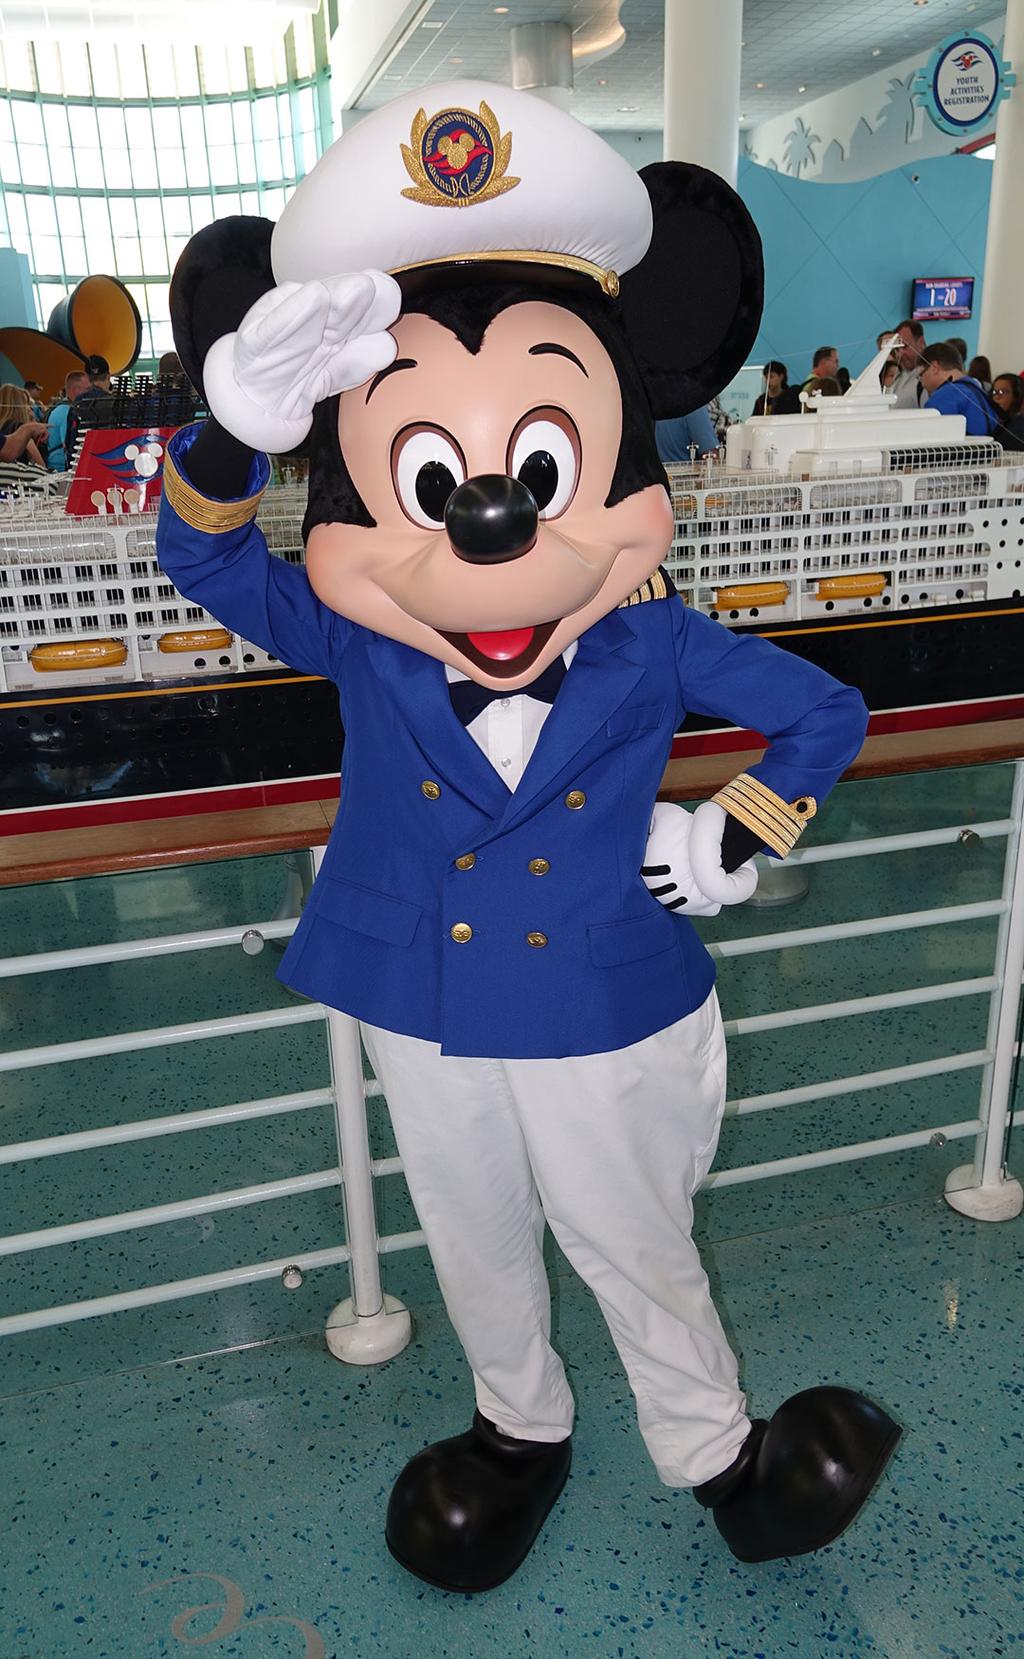 Once inside the terminal building, you can venture off to the outside for a better look at the Disney ship.